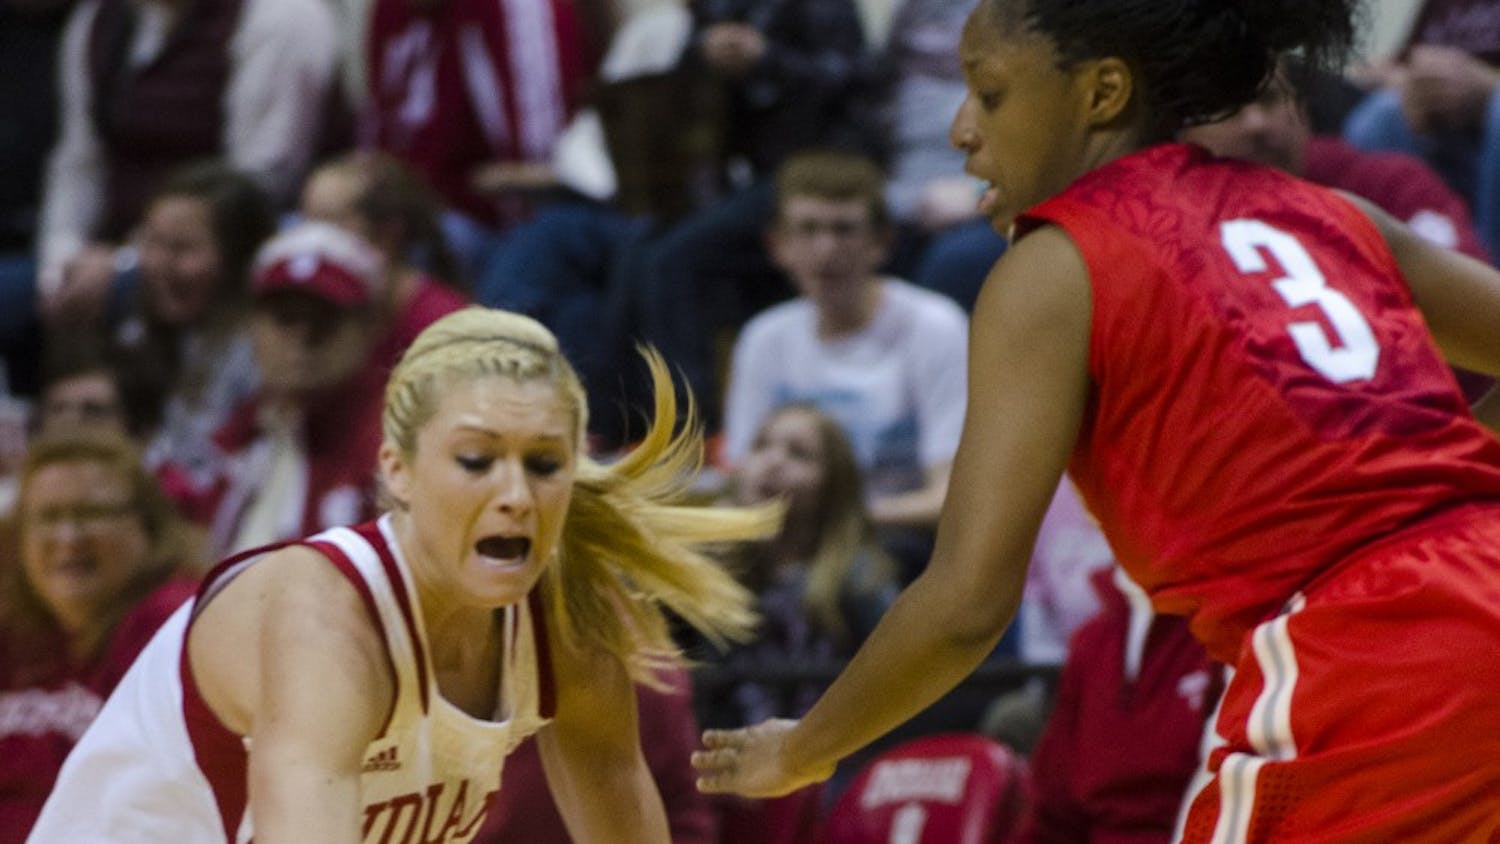 Freshman guard Tyra Buss drops the ball after being fouled by a pressuring Ohio State defense during the Hoosier's game on Thursday at Assembly Hall. Indiana lost 103-49 and will play its next home game against Wisconsin on Saturday.